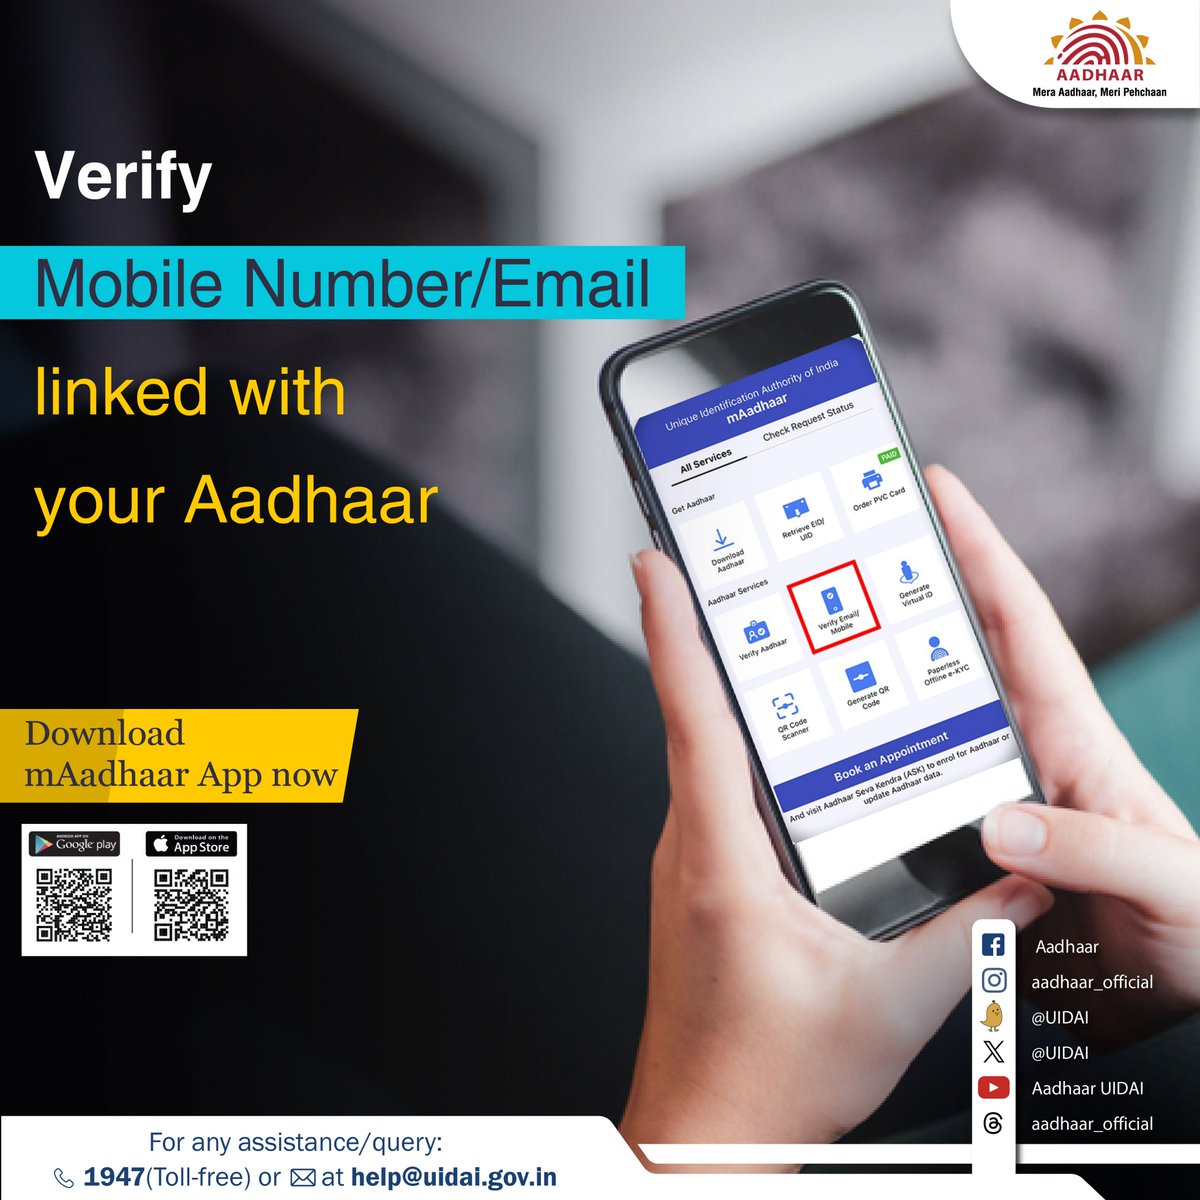 You can easily verify your updated Mobile Number or Email ID linked with your #Aadhaar using the #mAadhaar App. For more services, download and install the #mAadhaarApp from Google Play Store or App Store